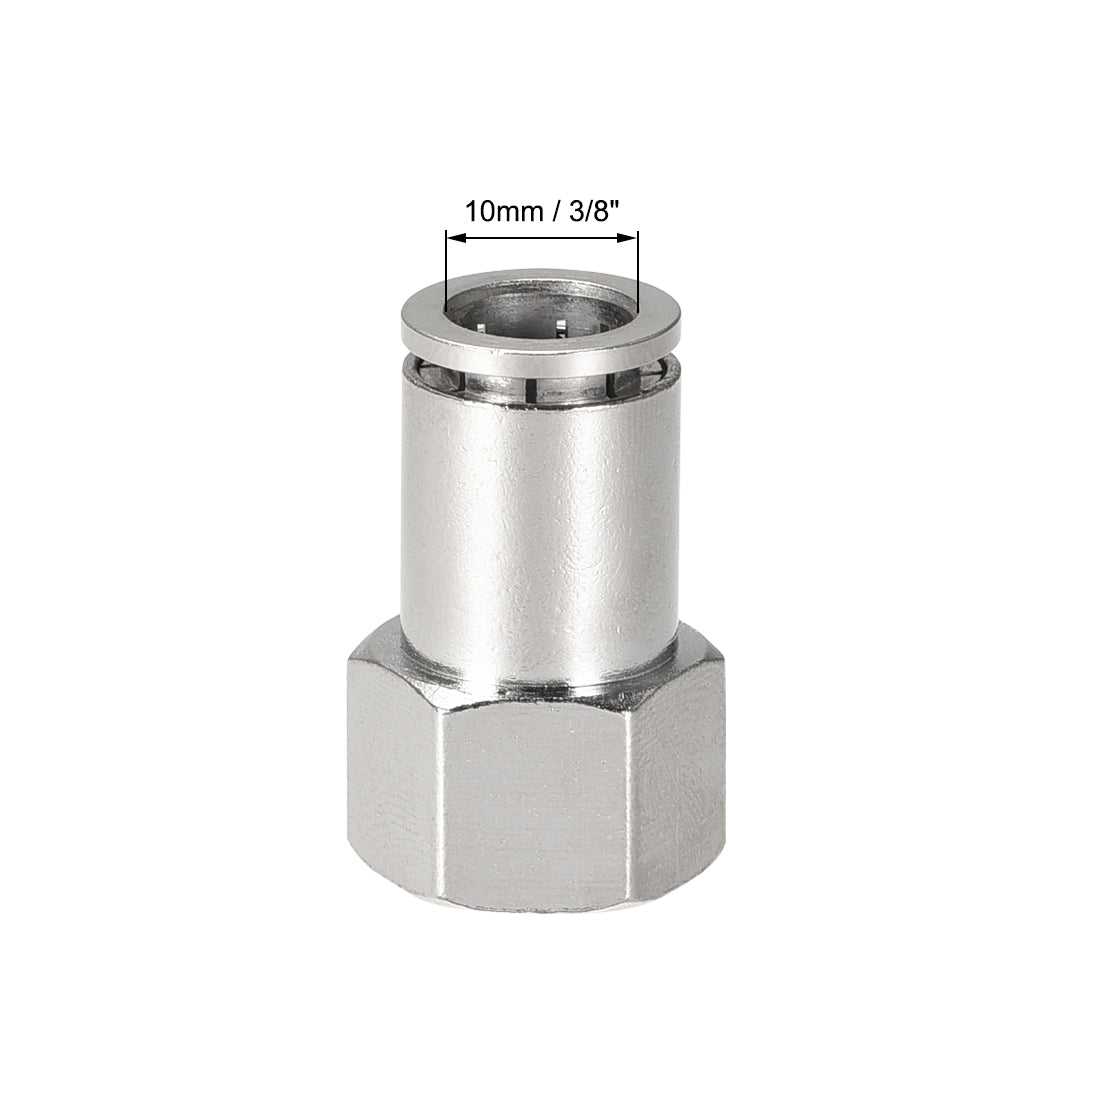 uxcell Uxcell Push to Connect Tube Fittings 10mm Tube OD x 3/8 PT Female Silver Tone 2Pcs